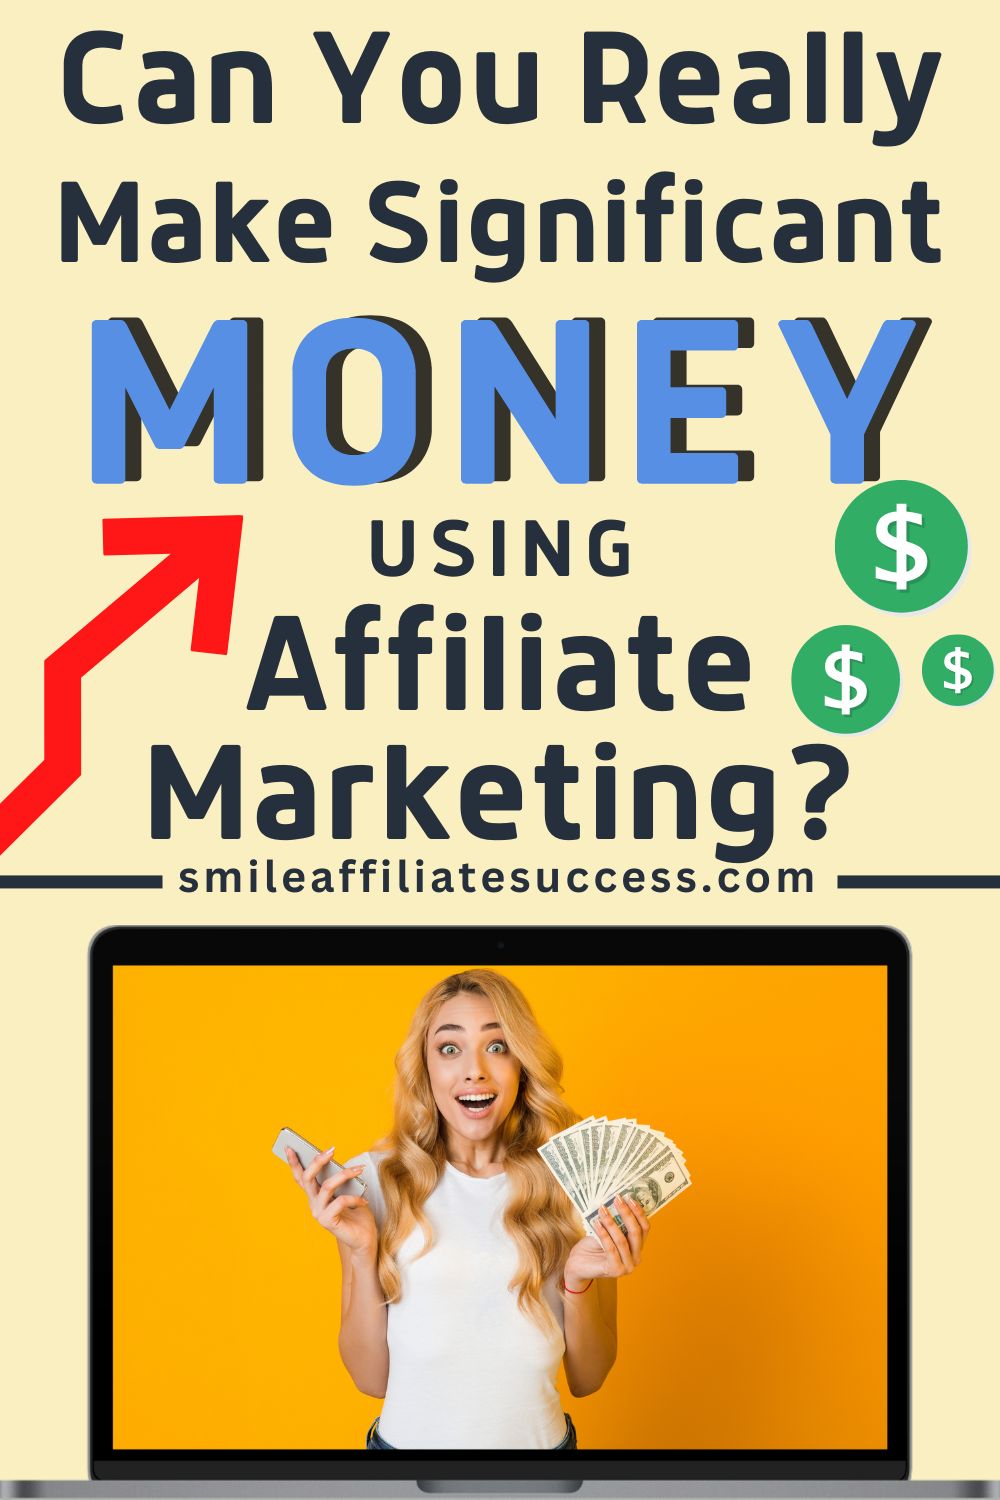 Can You Really Make Significant Money Using Affiliate Marketing?